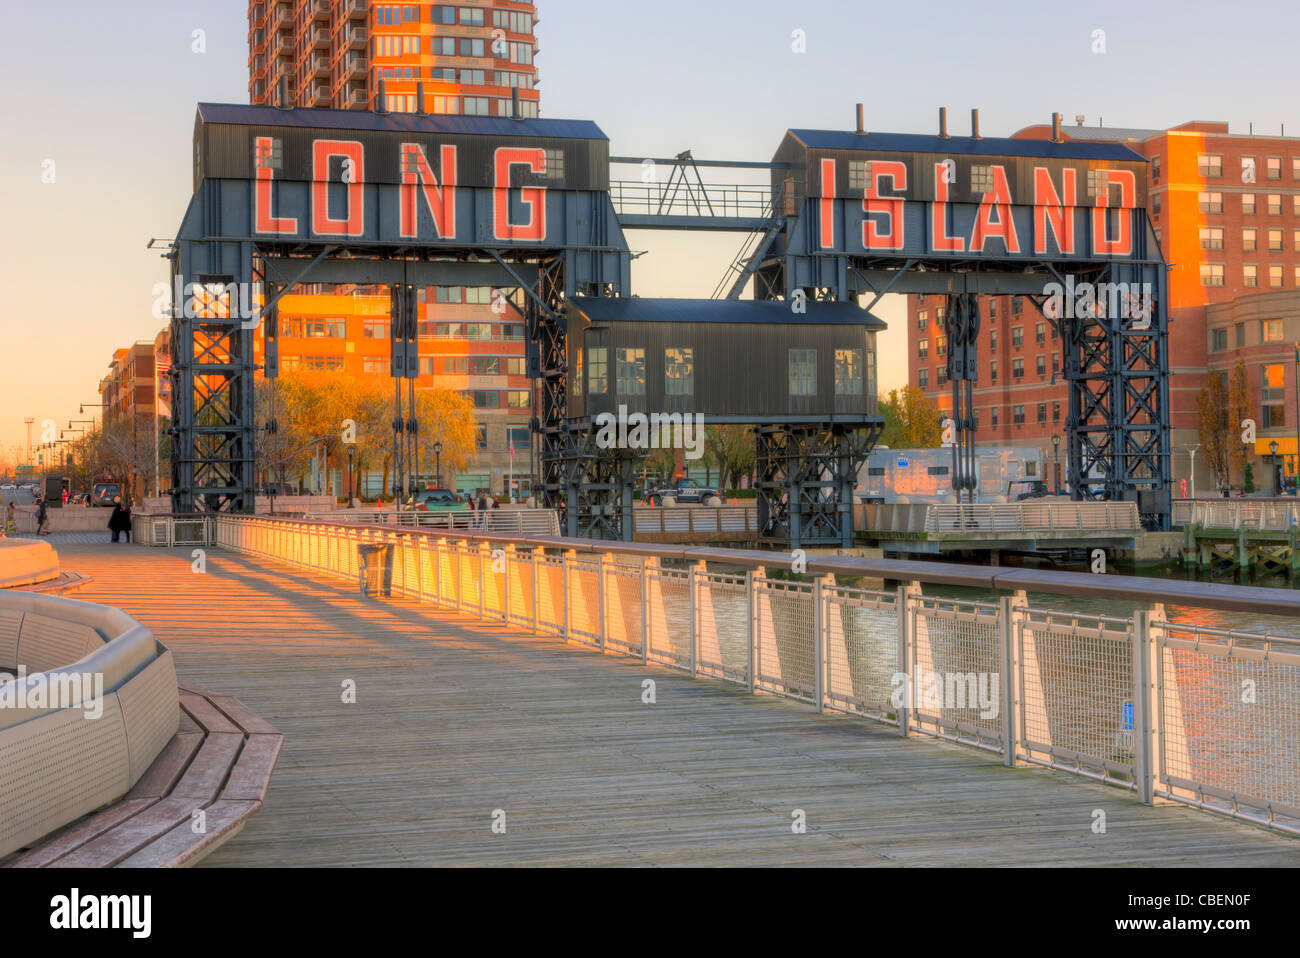 'Long Island' Gantry cranes in Gantry Plaza State Park in Long Island City, Queens, New York City. Stock Photo